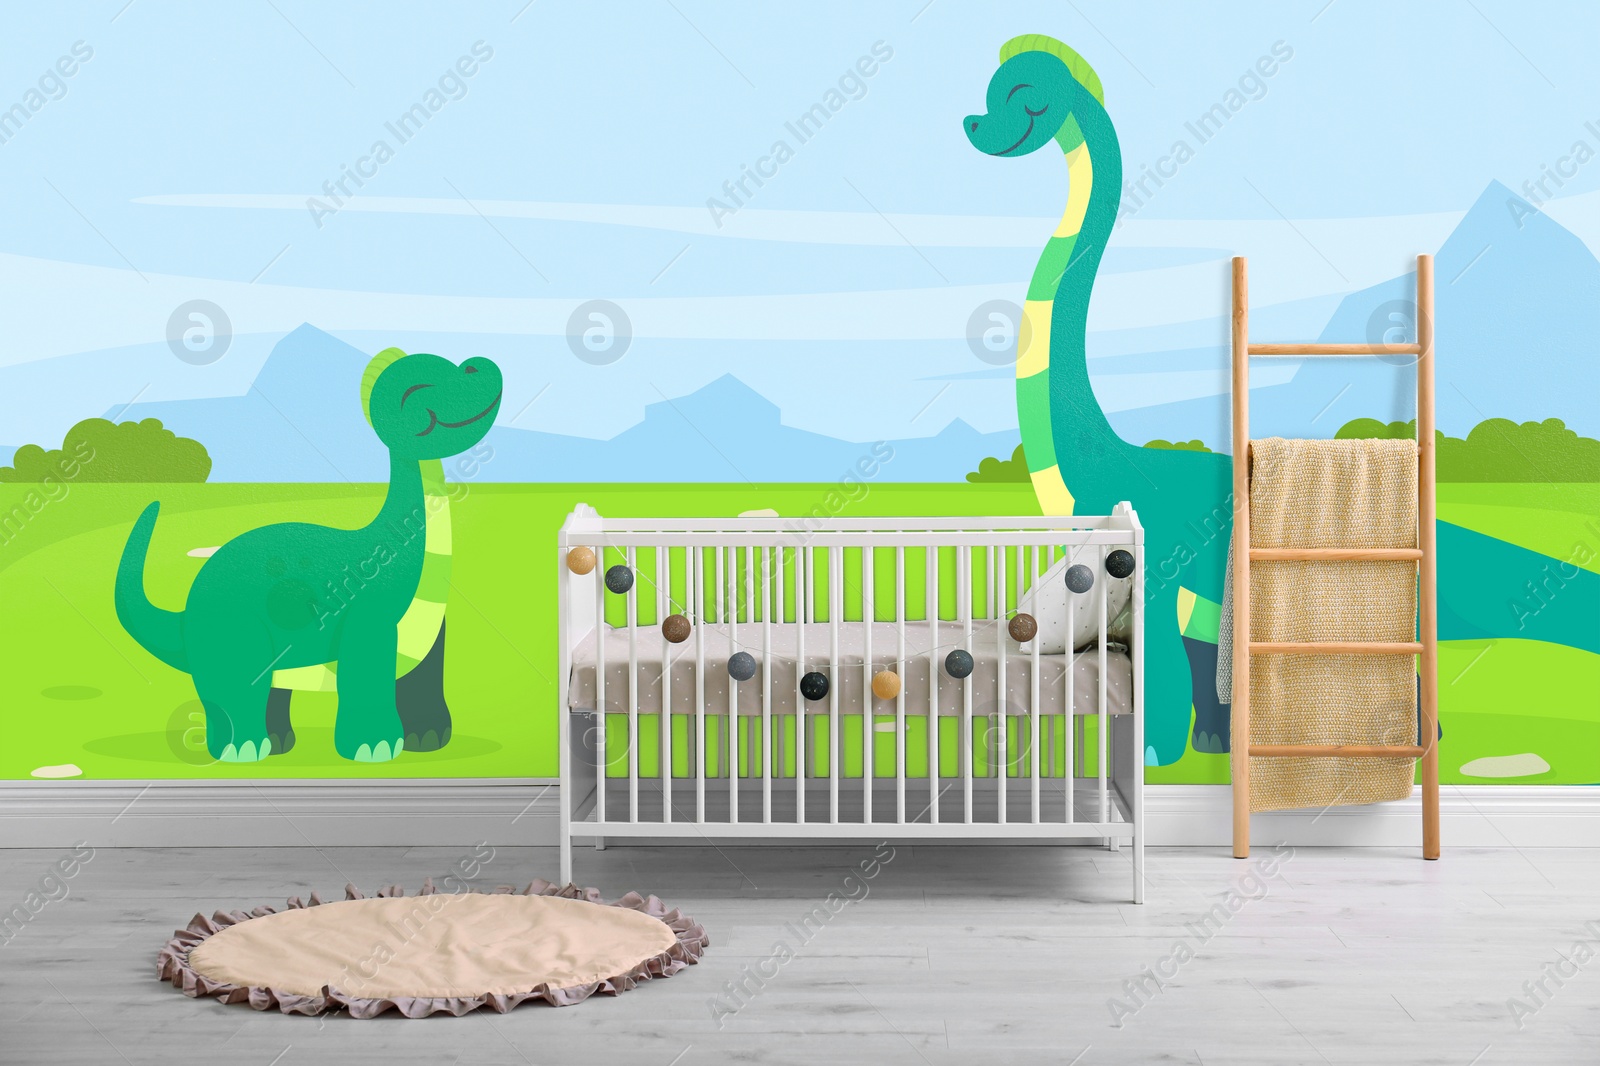 Image of Baby room interior with crib. Cartoon style wallpapers with dinosaurs